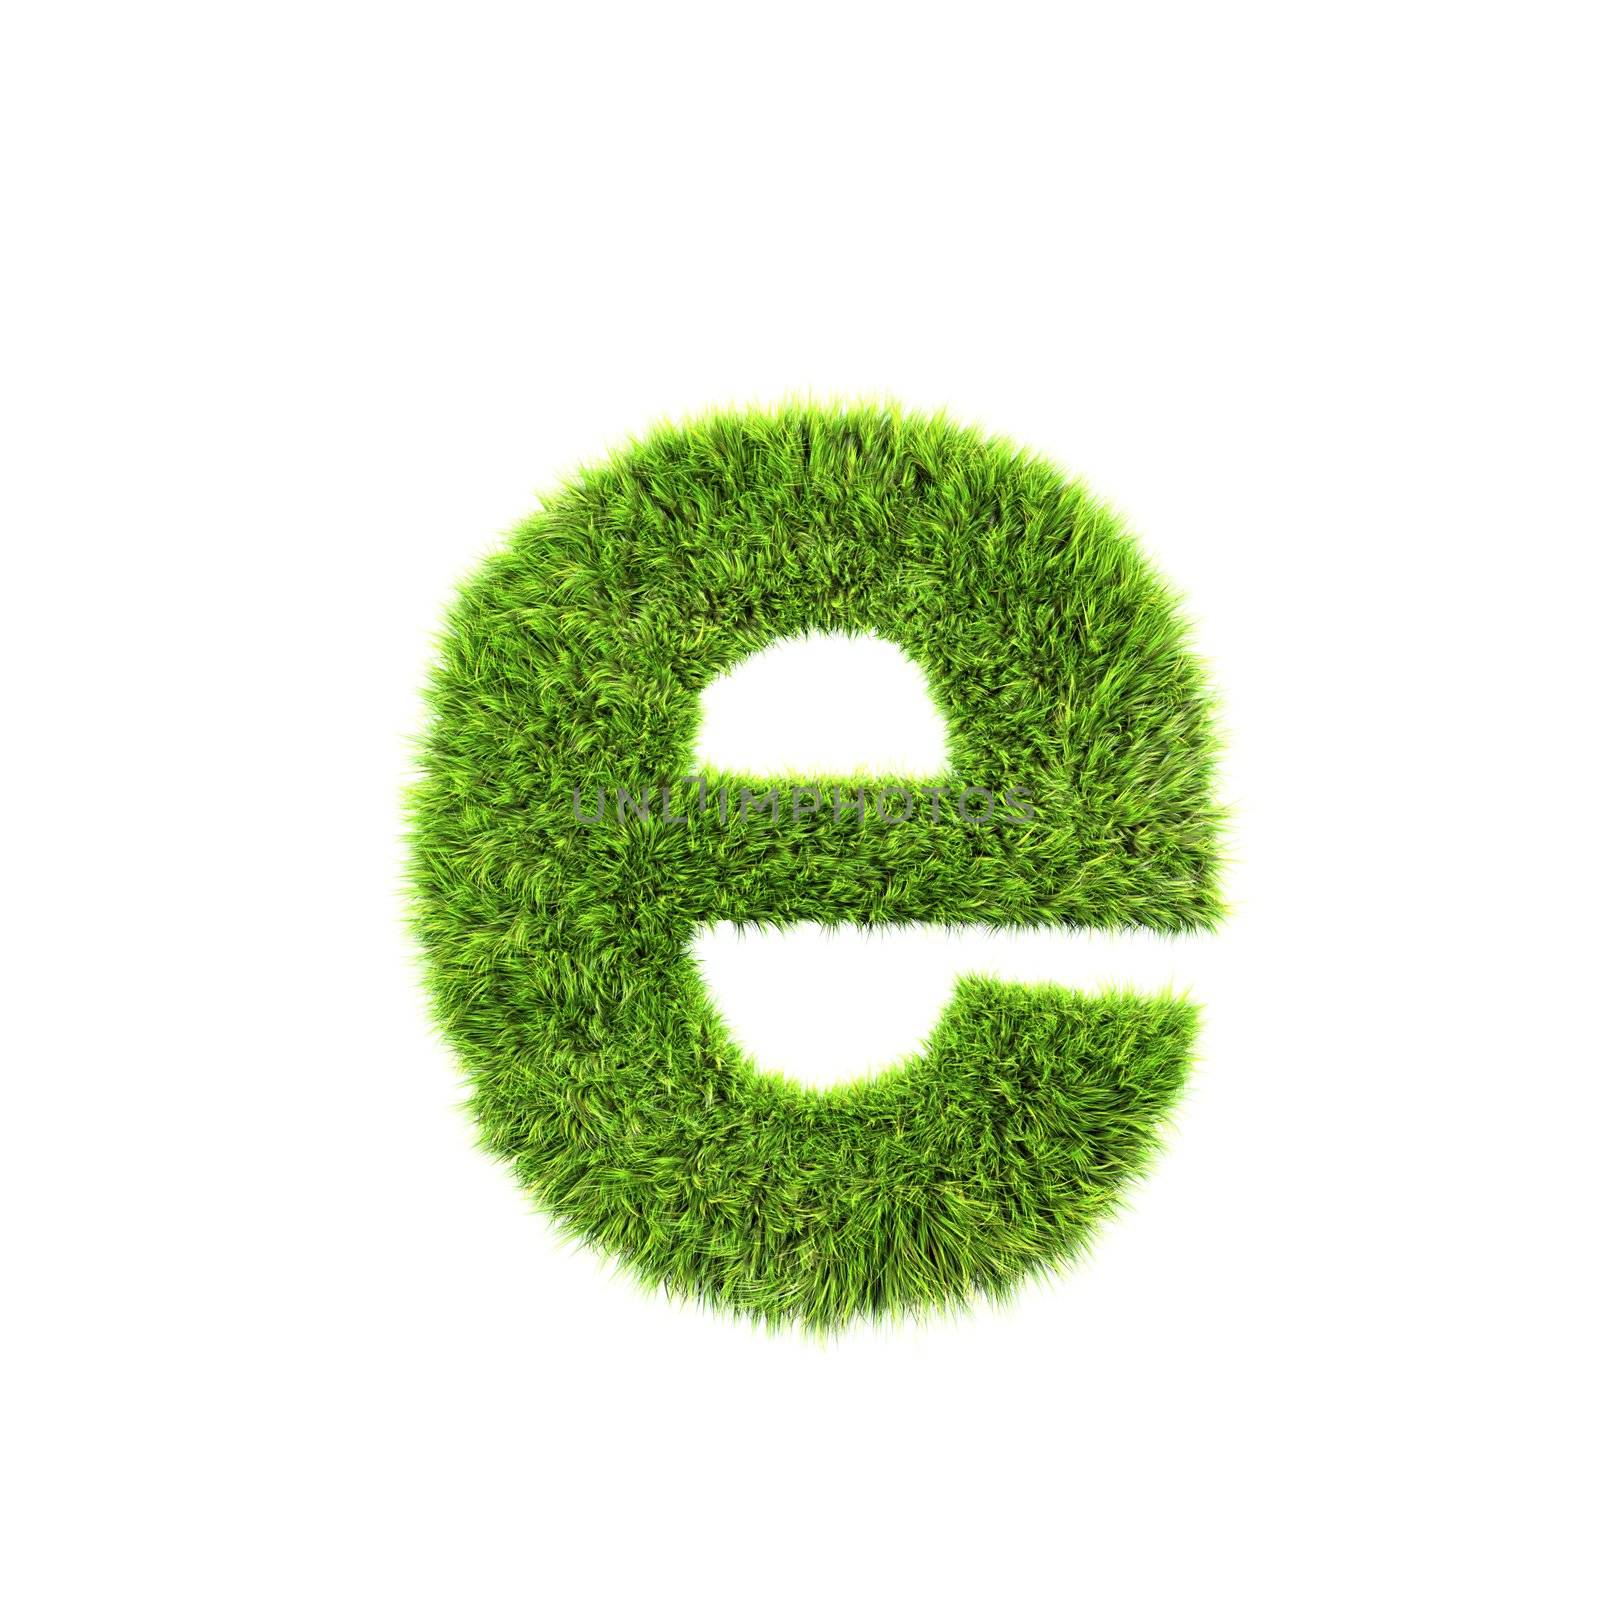 3d grass letter isolated on white background - e by chrisroll